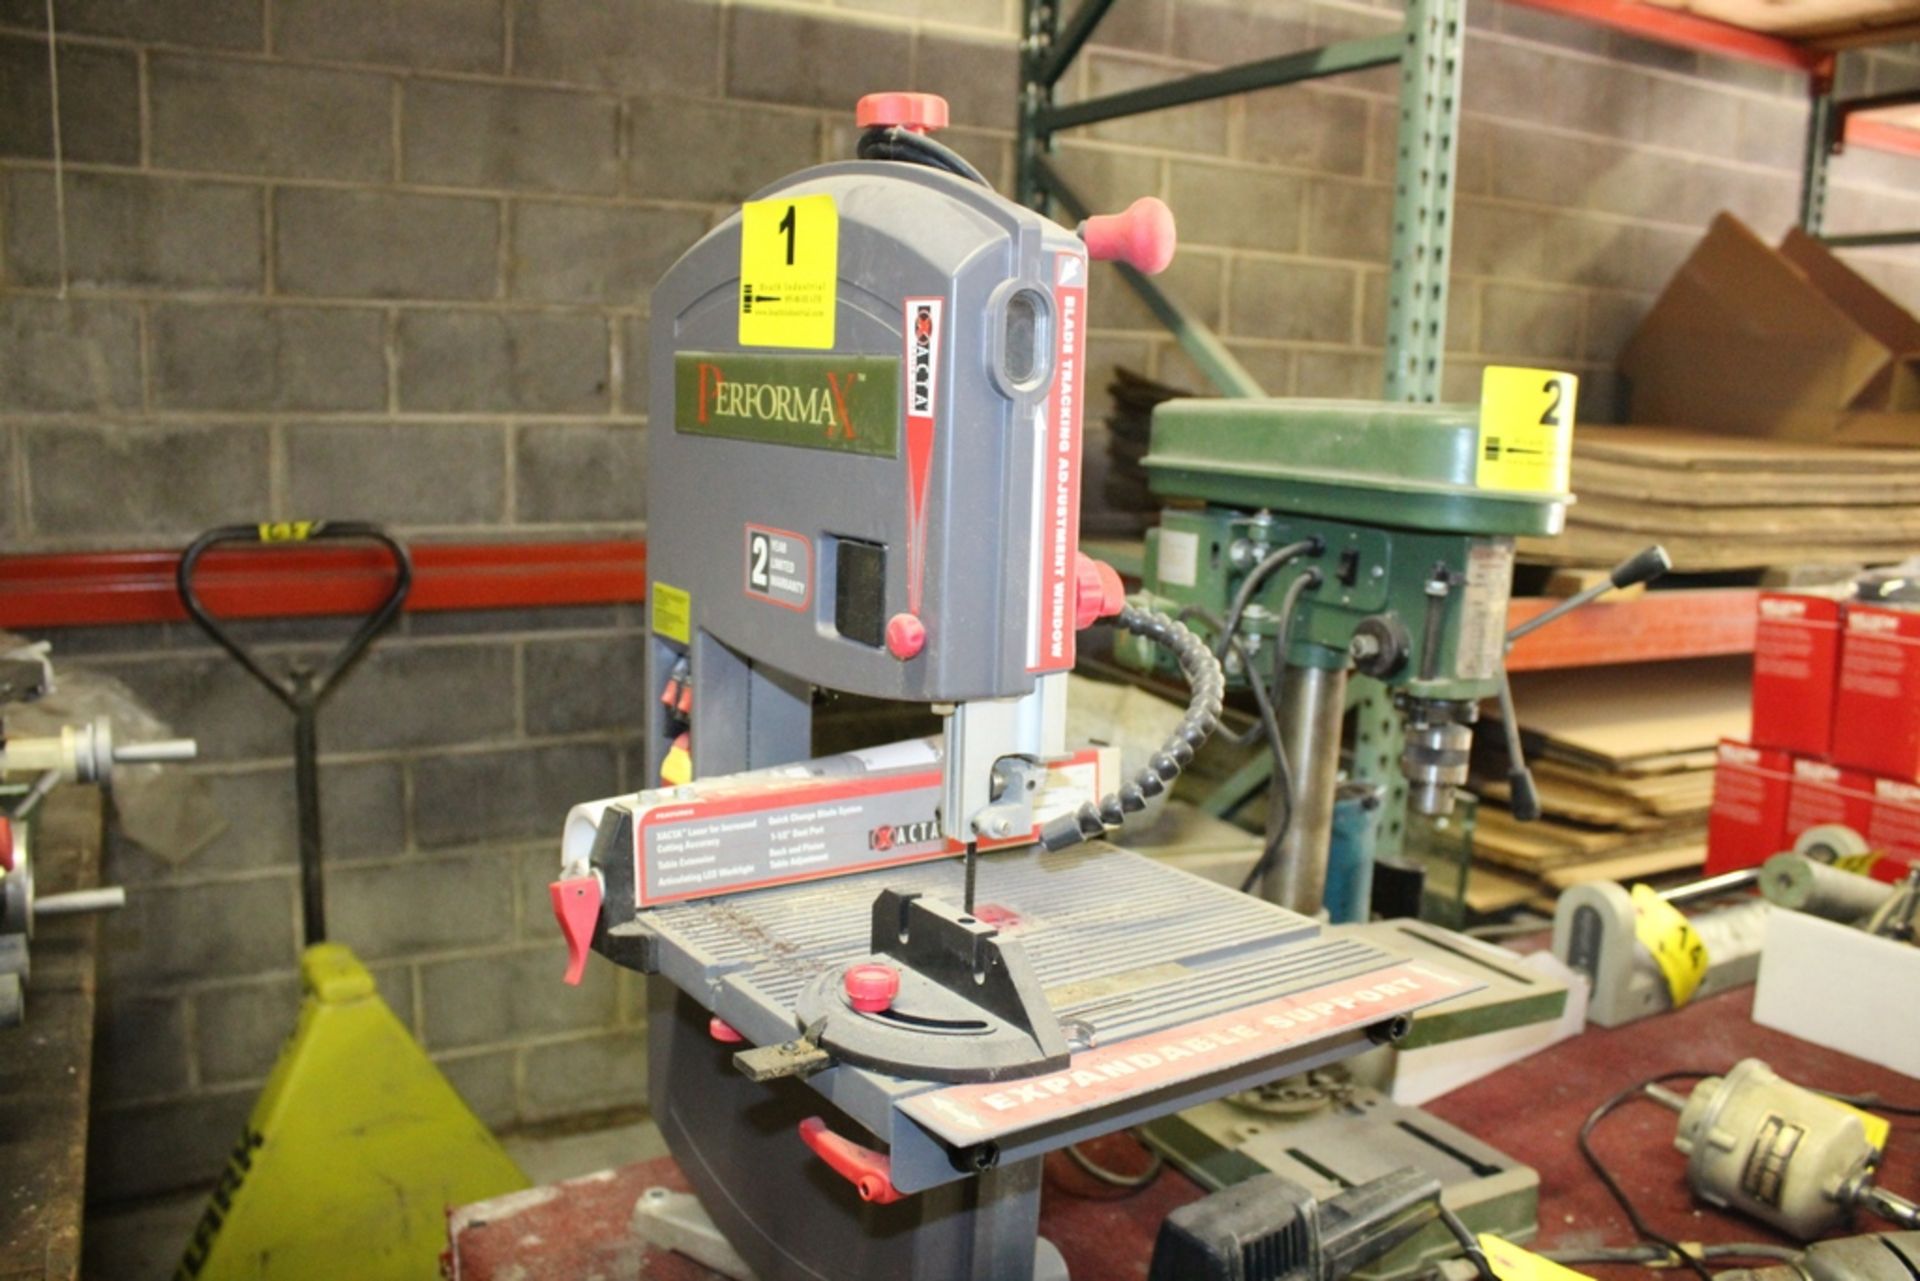 PERFORMAX 9" BENCHTOP BAND SAW WITH XACTA LASER GUIDE